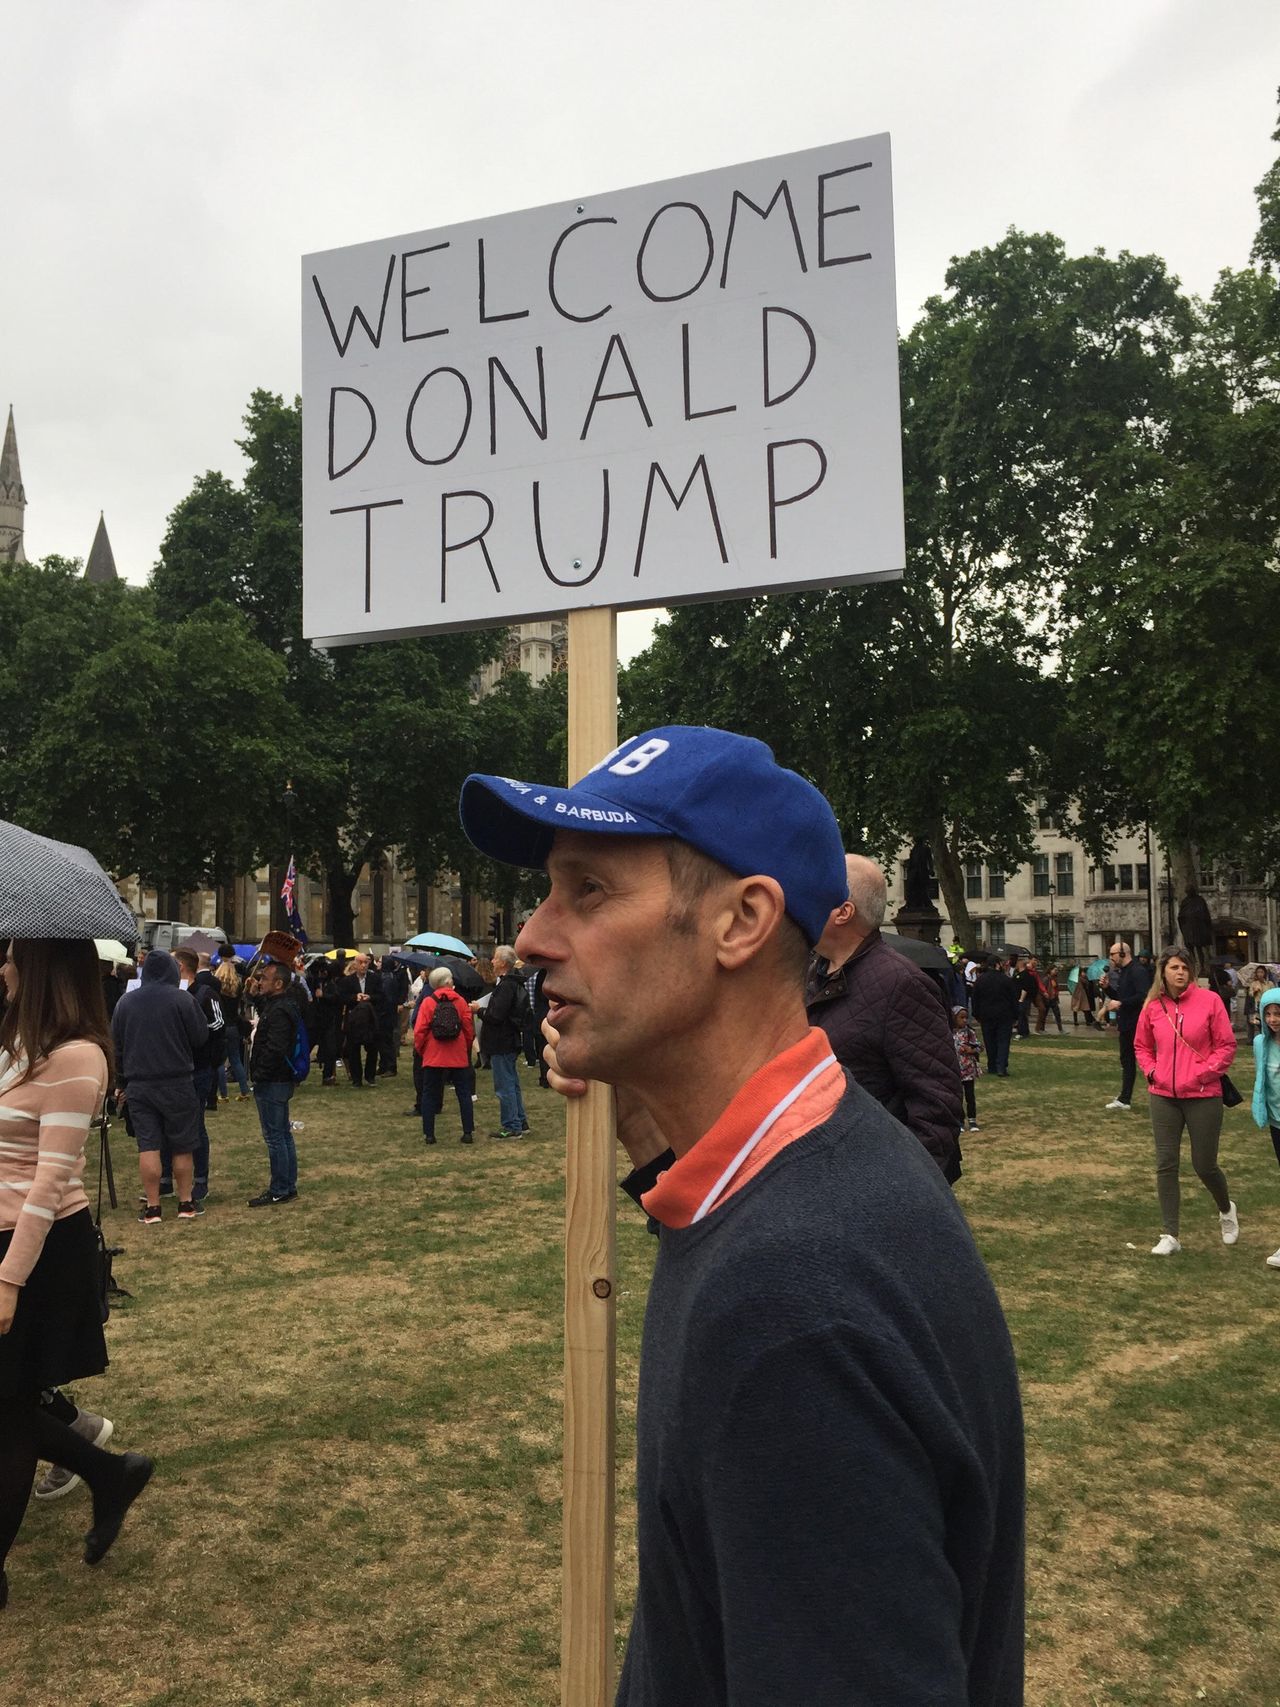 Ricky Bohanan, 60, holds his ‘Welcome Donald Trump’ sign at a rally against the US leader in London on Tuesday.